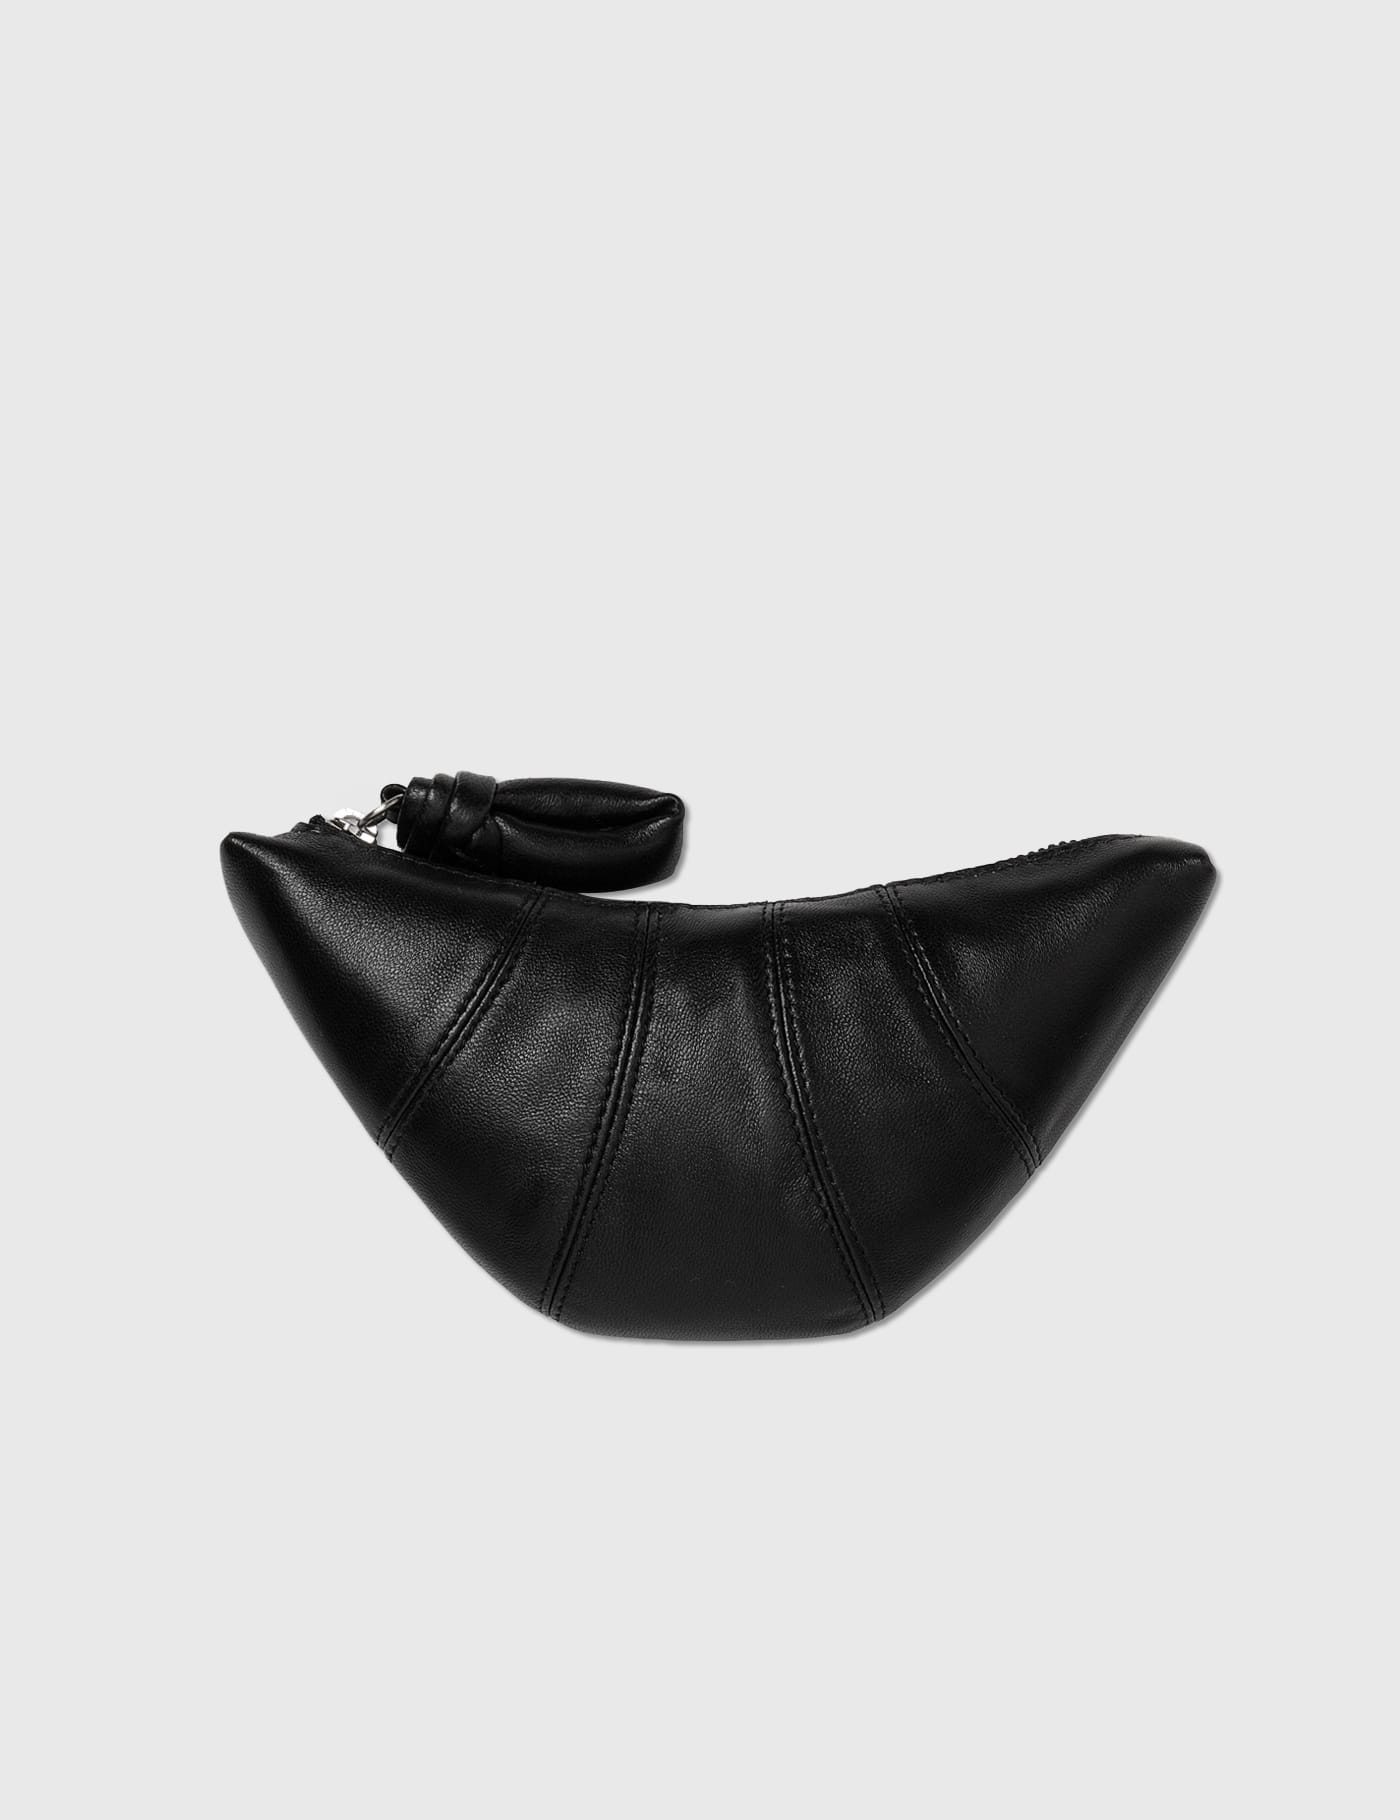 Lemaire - Croissant Coin Purse | HBX - Globally Curated Fashion 